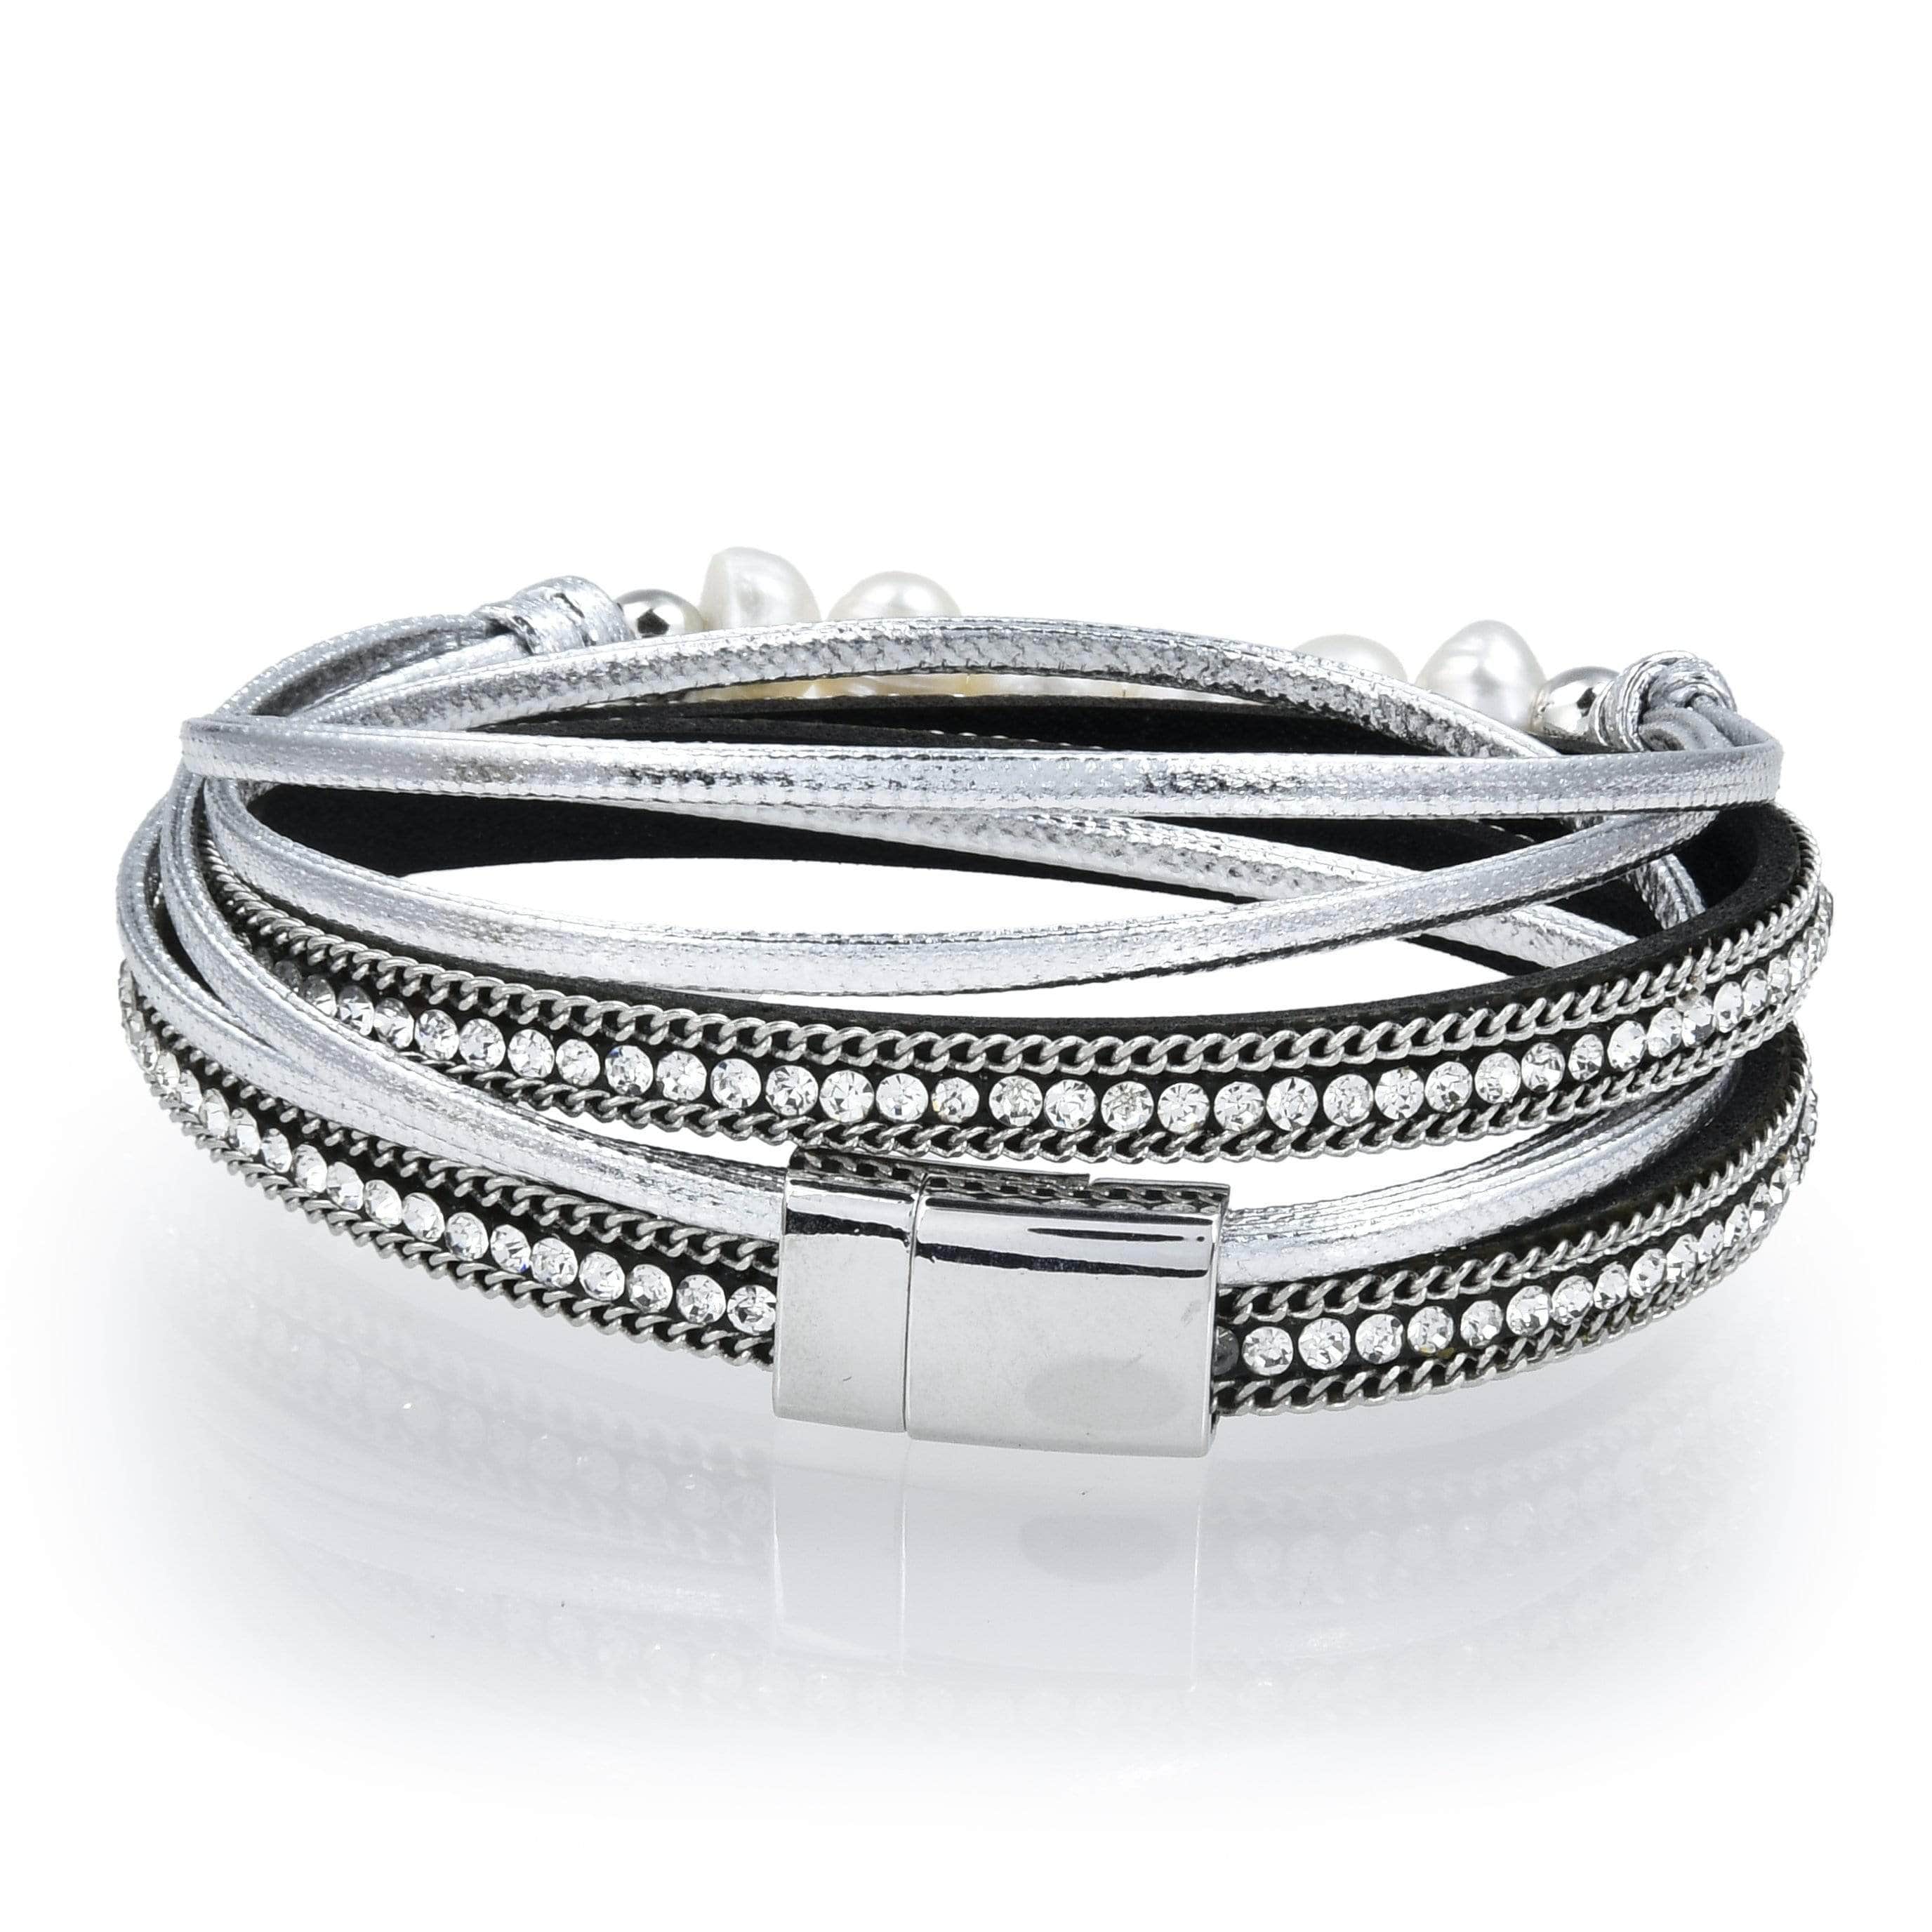 Kalifano Multiwrap Bracelets Multiple Strand Pearl and Diamonds Silver Bracelet with Magnetic Clasp BMW-20-SR